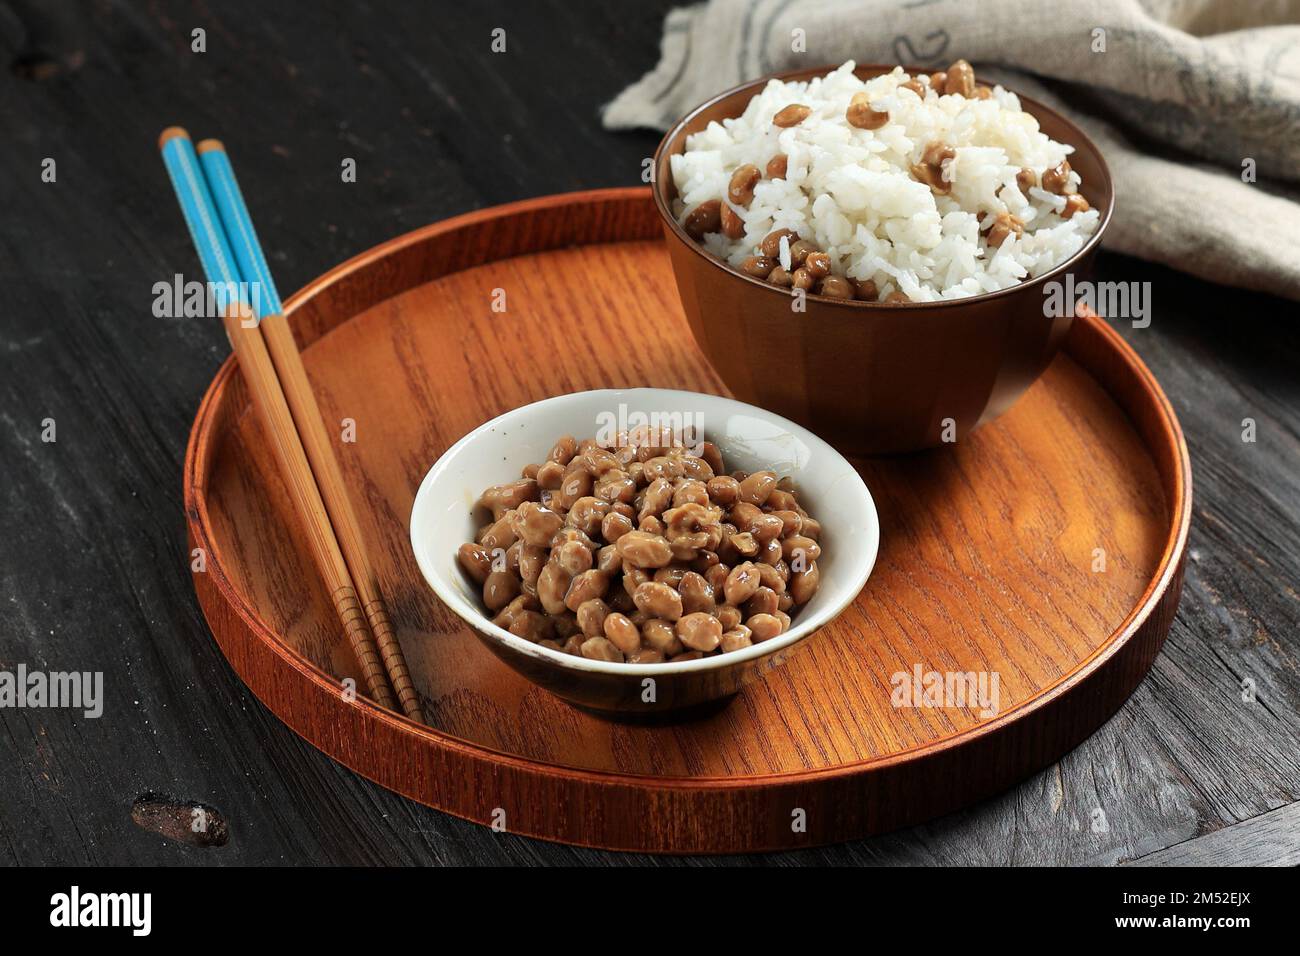 Japanese Soybean Fermented Food with Stinky Smell or Natto Stock Photo